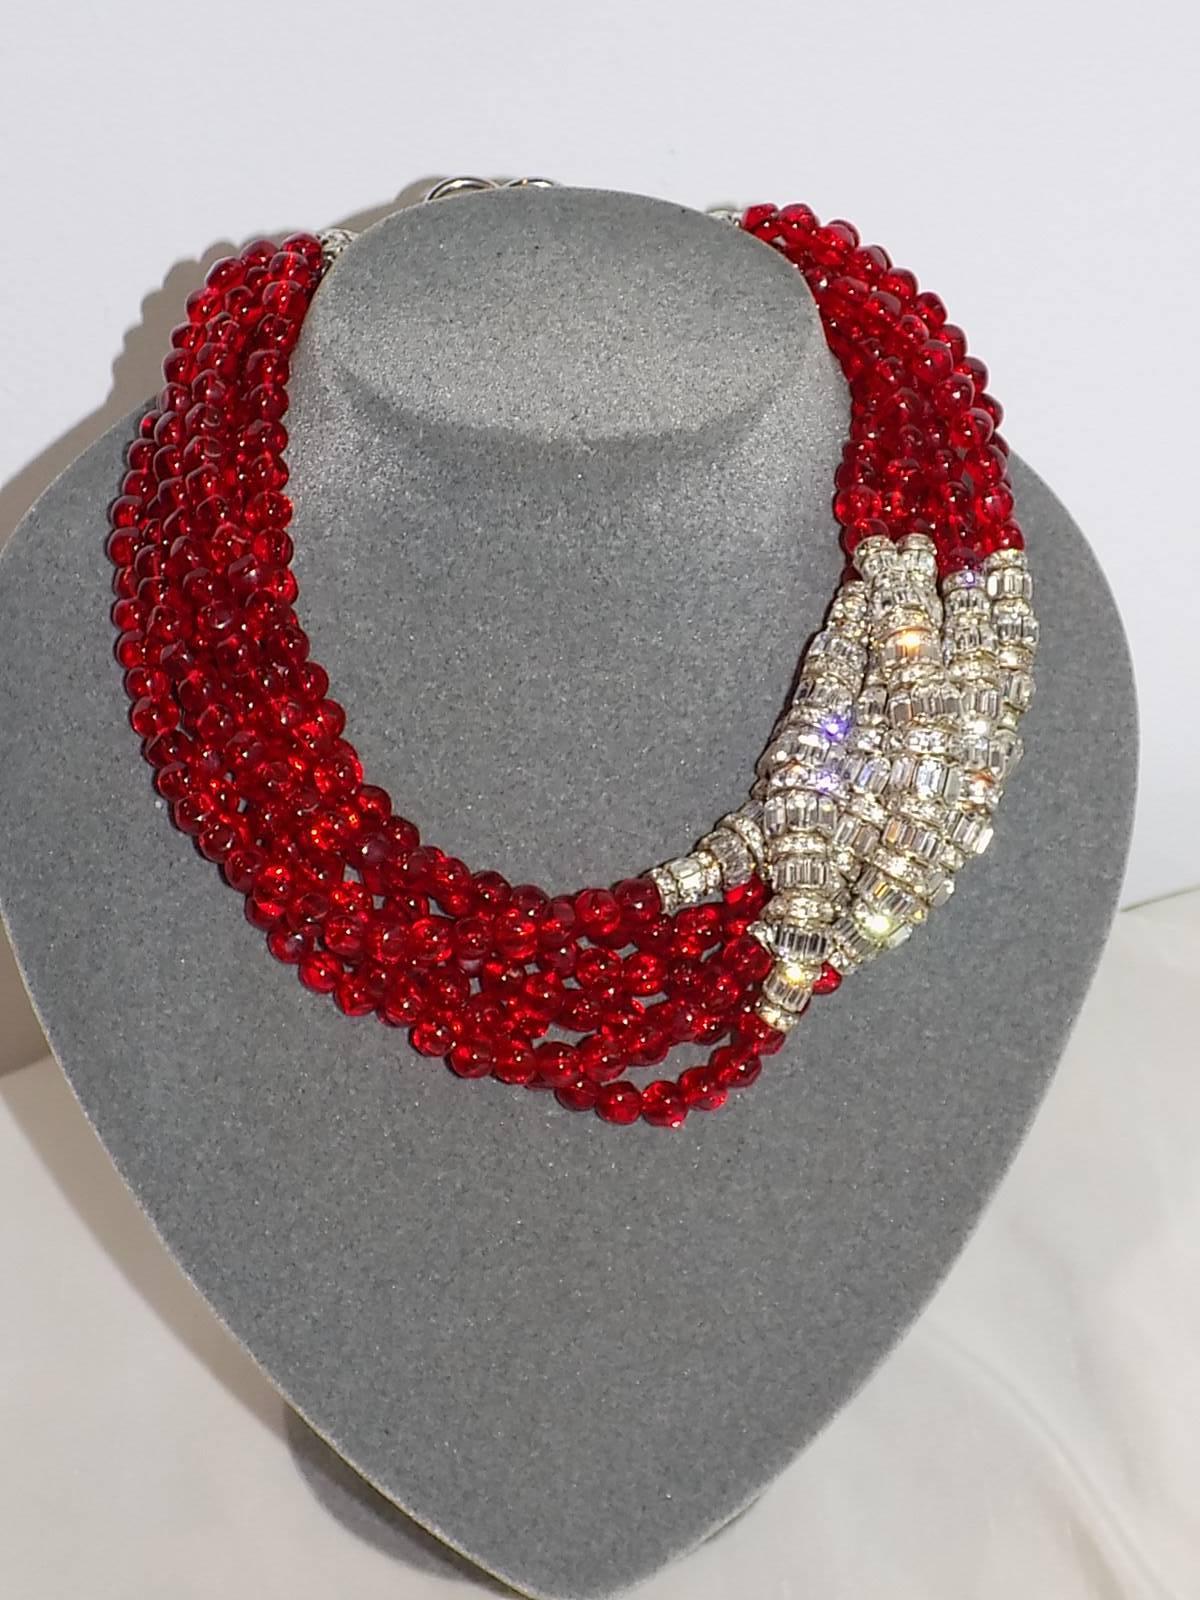 Since 1968 Anne Klein worked for Hattie Carnegie before she started her own company in 1968. When she died in 1974, Donna Karan and Louis Dell'Olio continued designing jewelry for her company. 
You are looking at divine massive   7 rows ruby   red